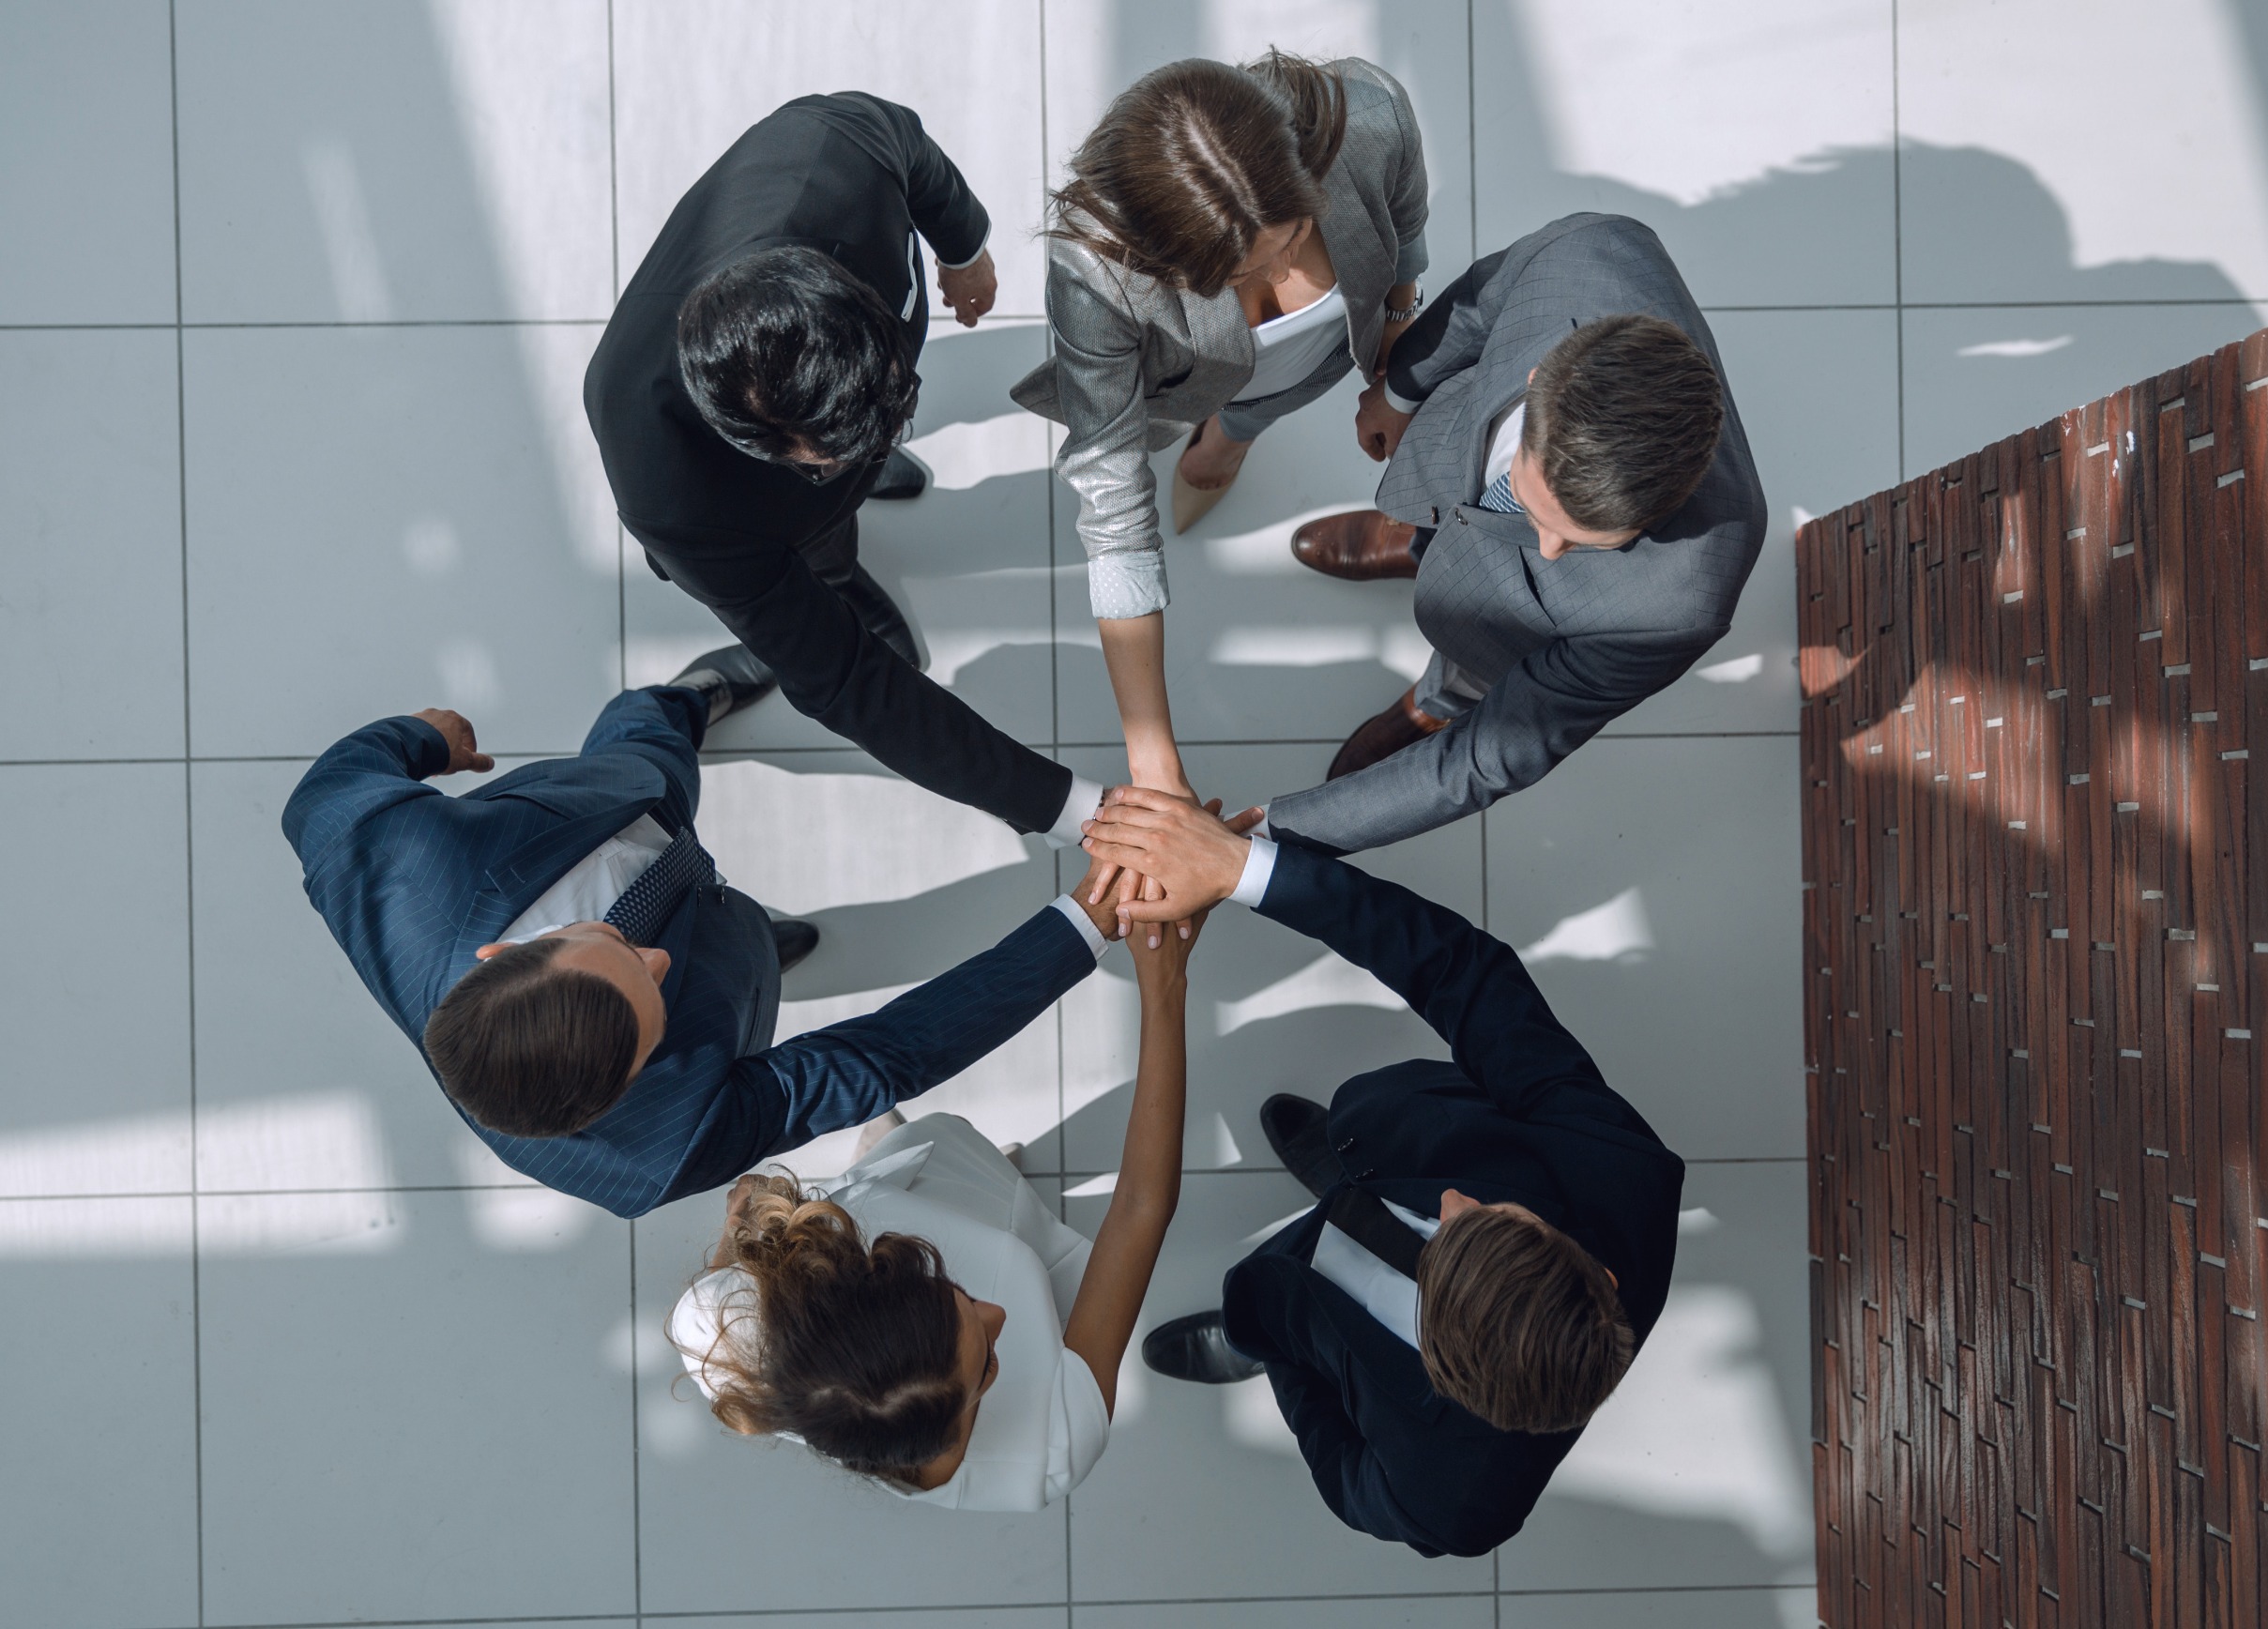 <p>While teamwork is valued, claiming sole credit for achievements that were clearly the result of a team effort can be misleading. HR prefers candidates who can distinguish between their individual contributions and team projects.</p>